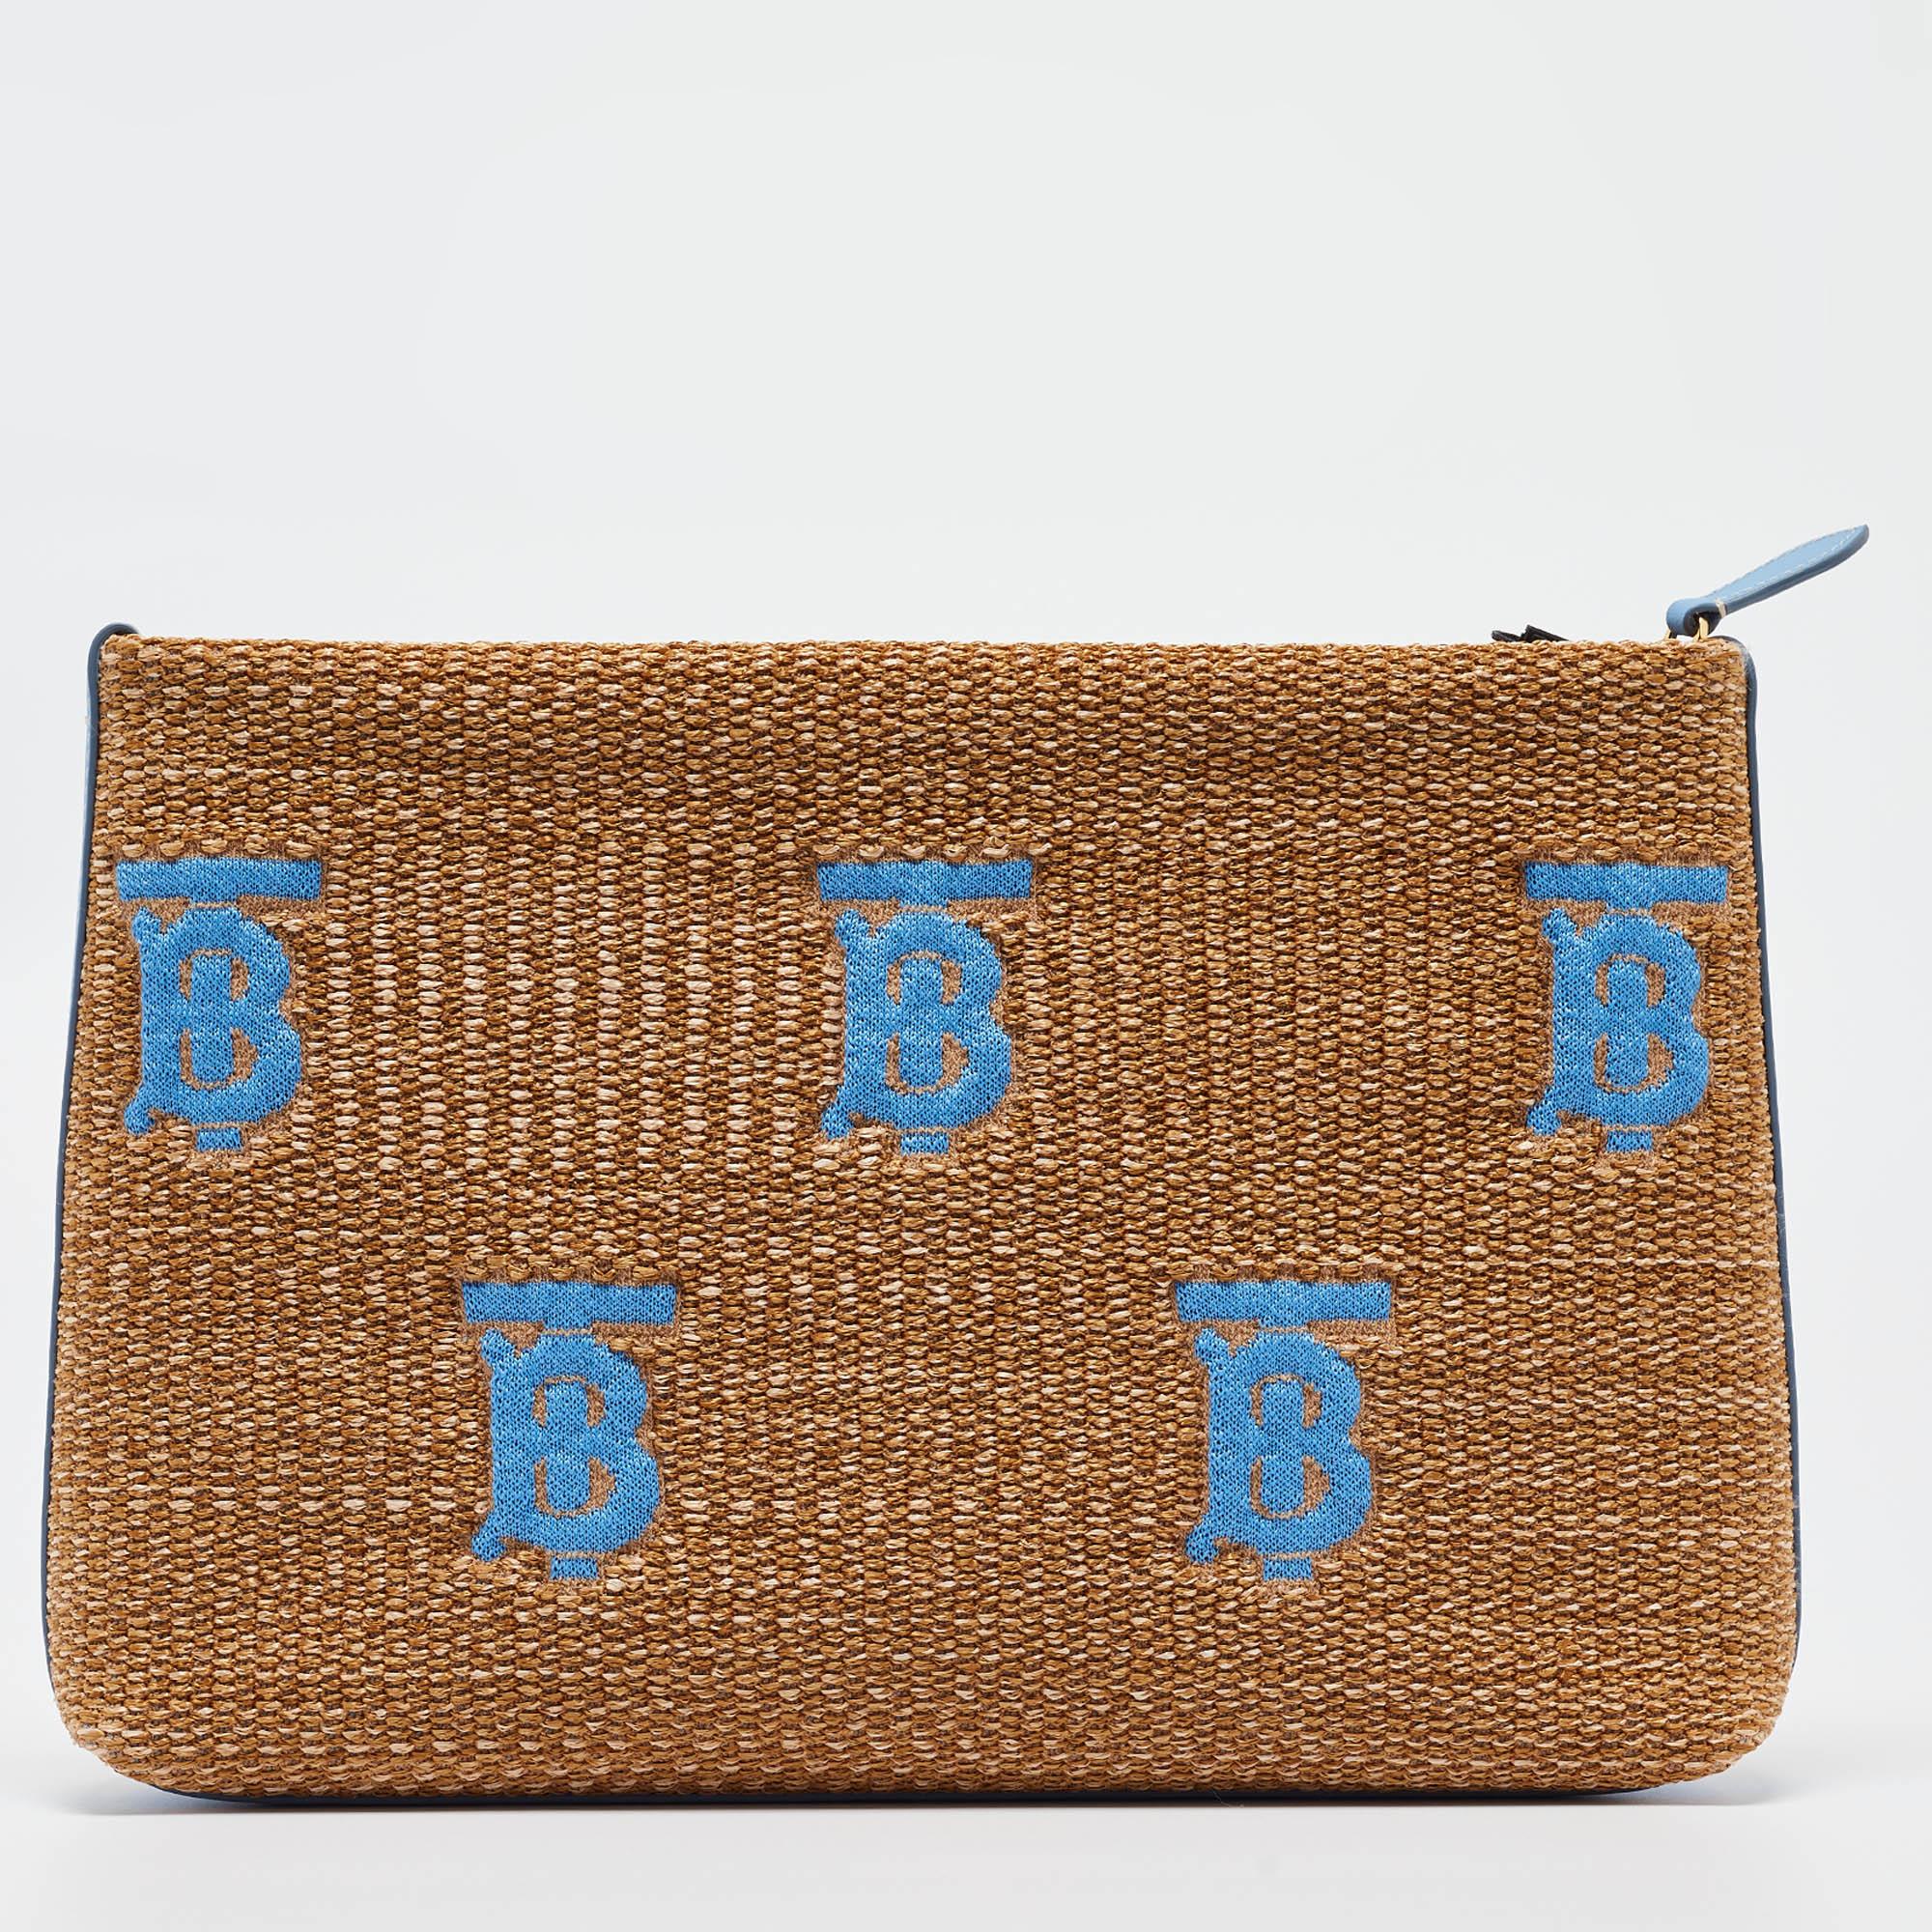 Burberry Beige/Blue Straw and Leather Duncan Clutch In Excellent Condition For Sale In Dubai, Al Qouz 2